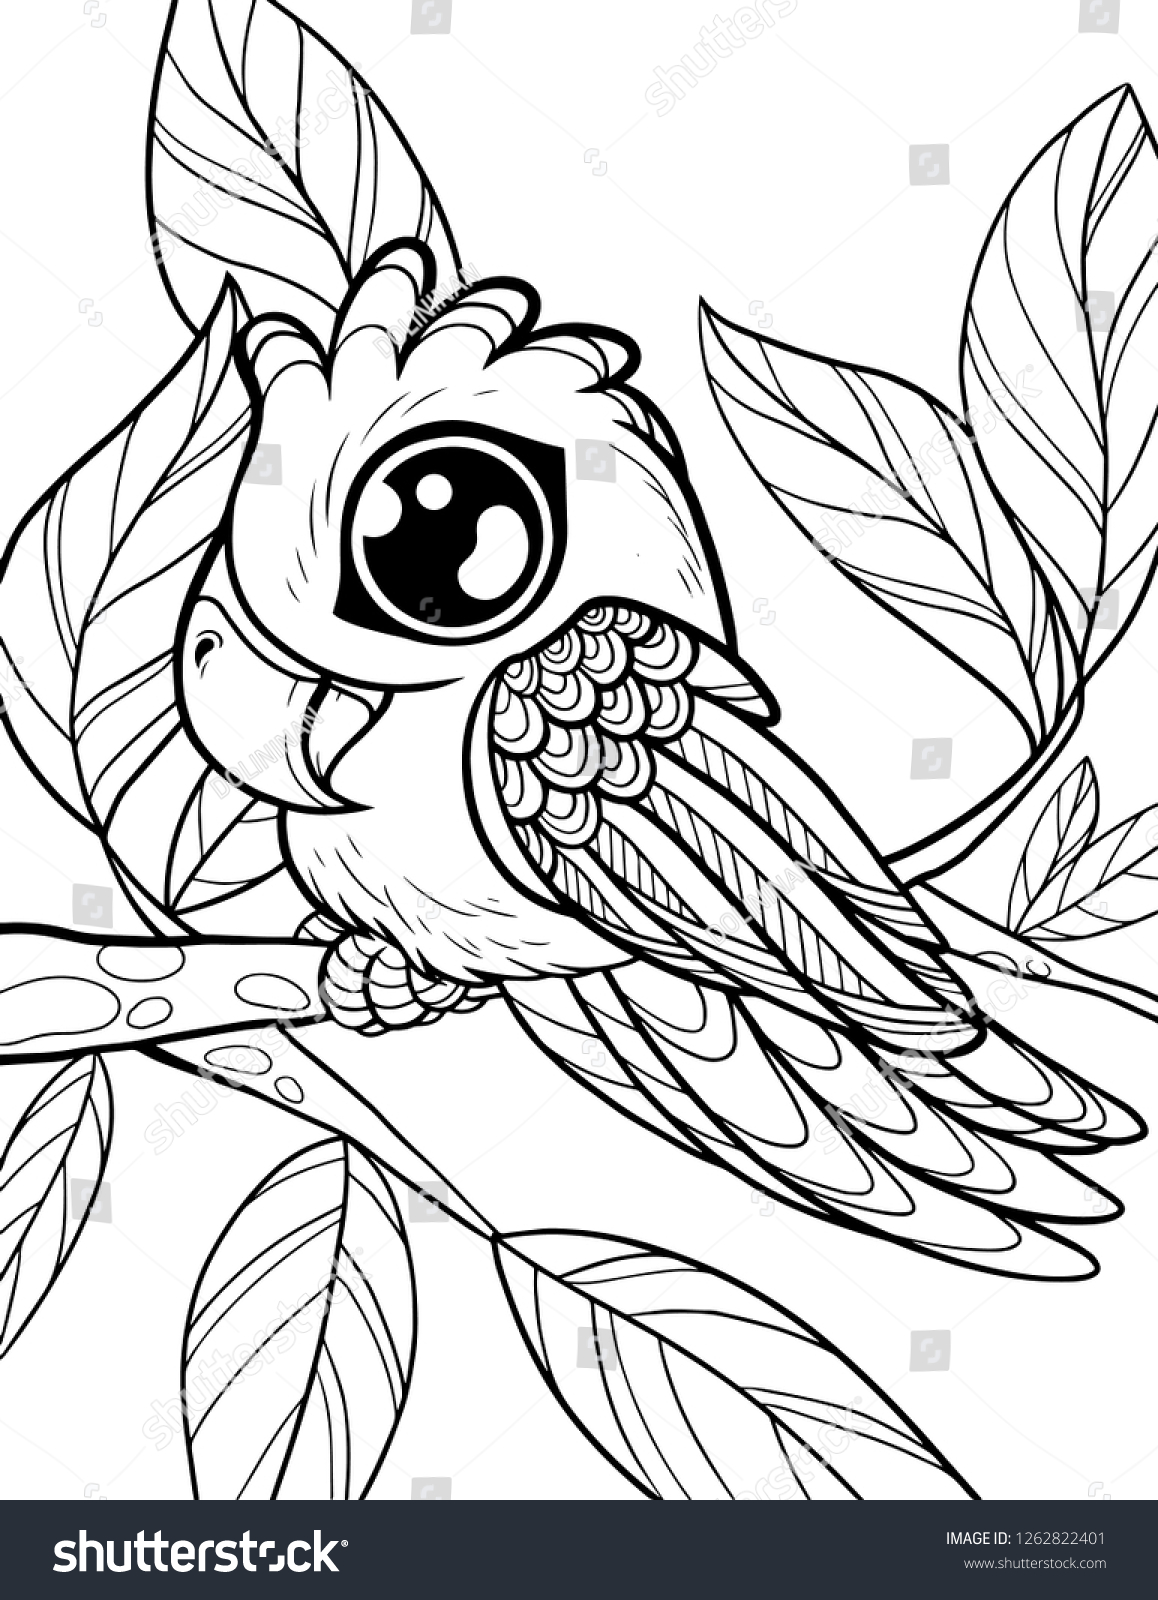 Vector coloring page children cute animals stock vector royalty free